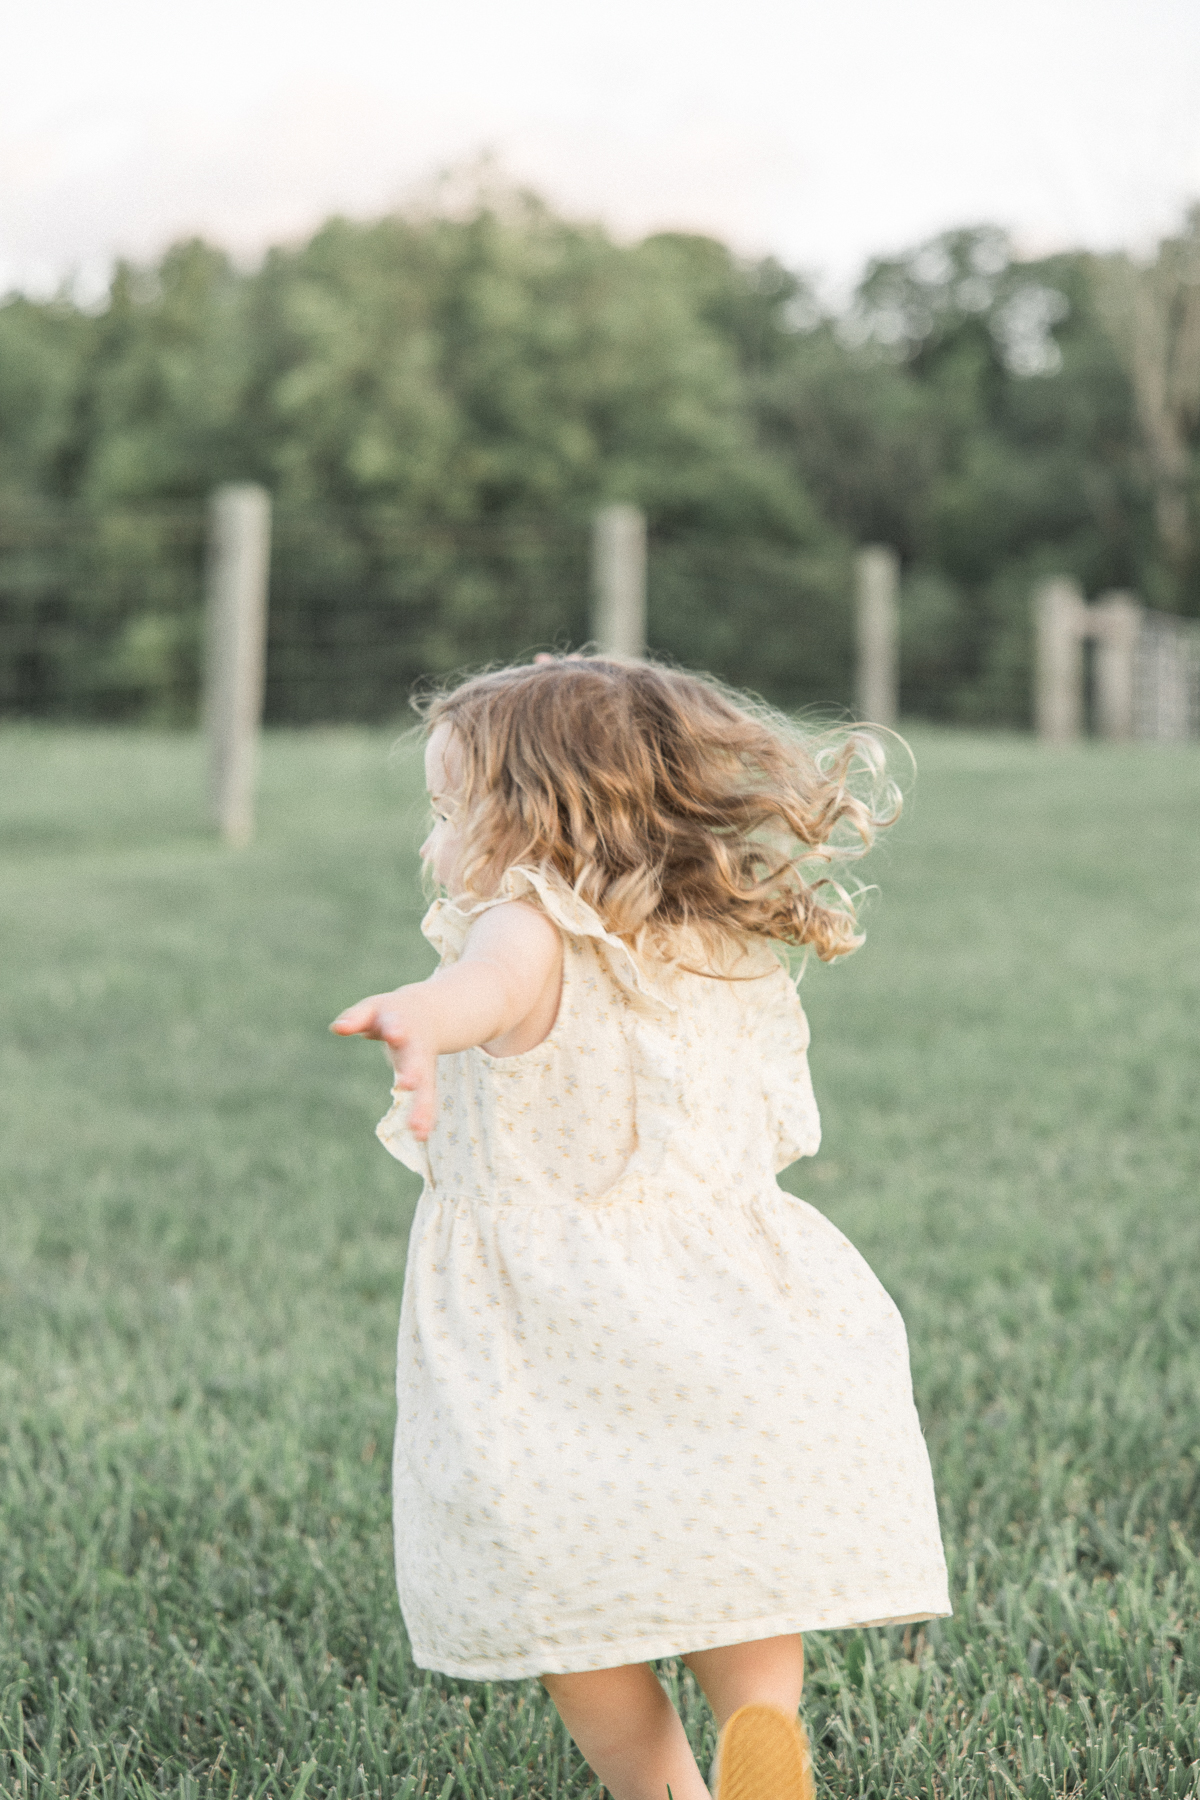 Toddler girl runs in a grassy field at Trader's Point Creamery indianapolis baby shower venues